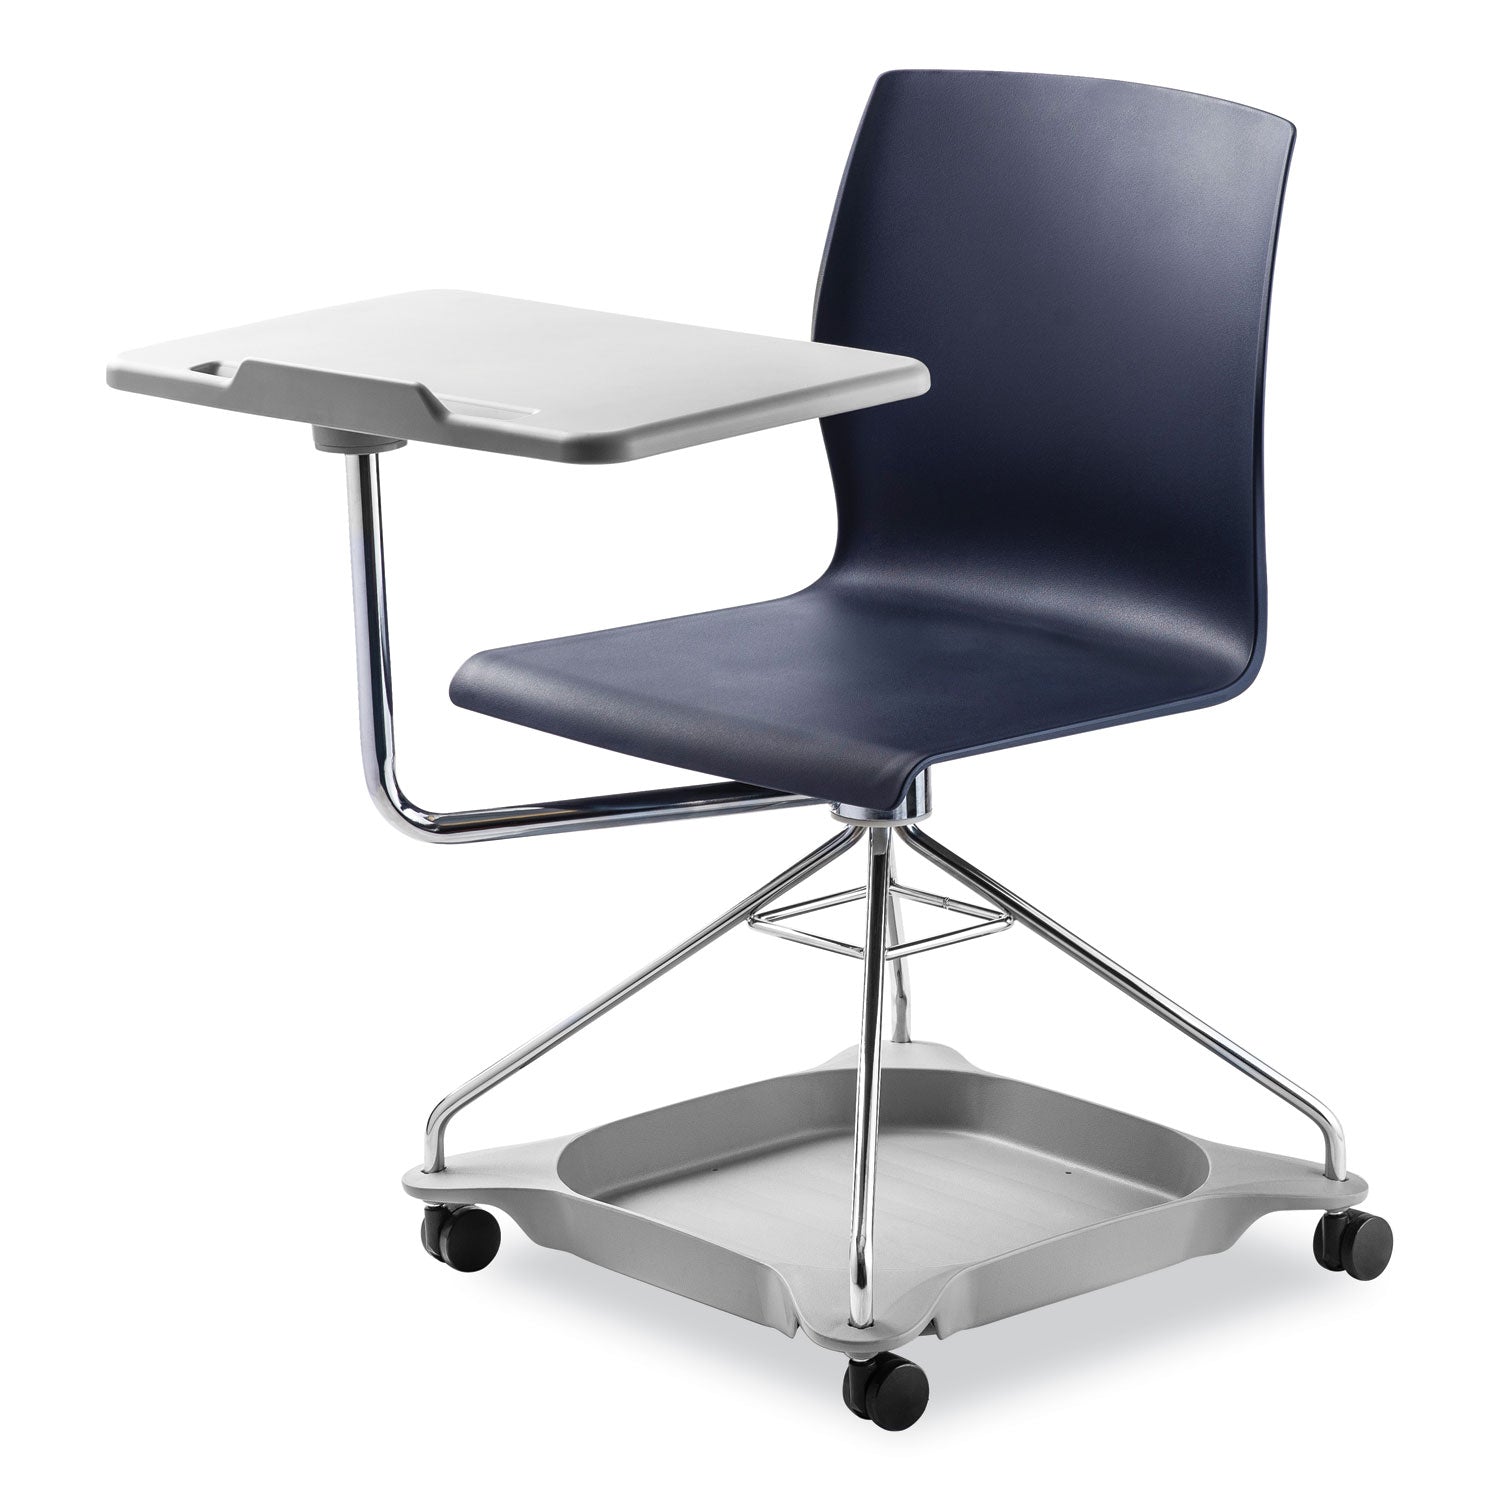 cogo-mobile-tablet-chair-supports-up-to-440-lb-1875-seat-height-blue-seat-back-chrome-frame-ships-in-1-3-business-days_npscogo04 - 2